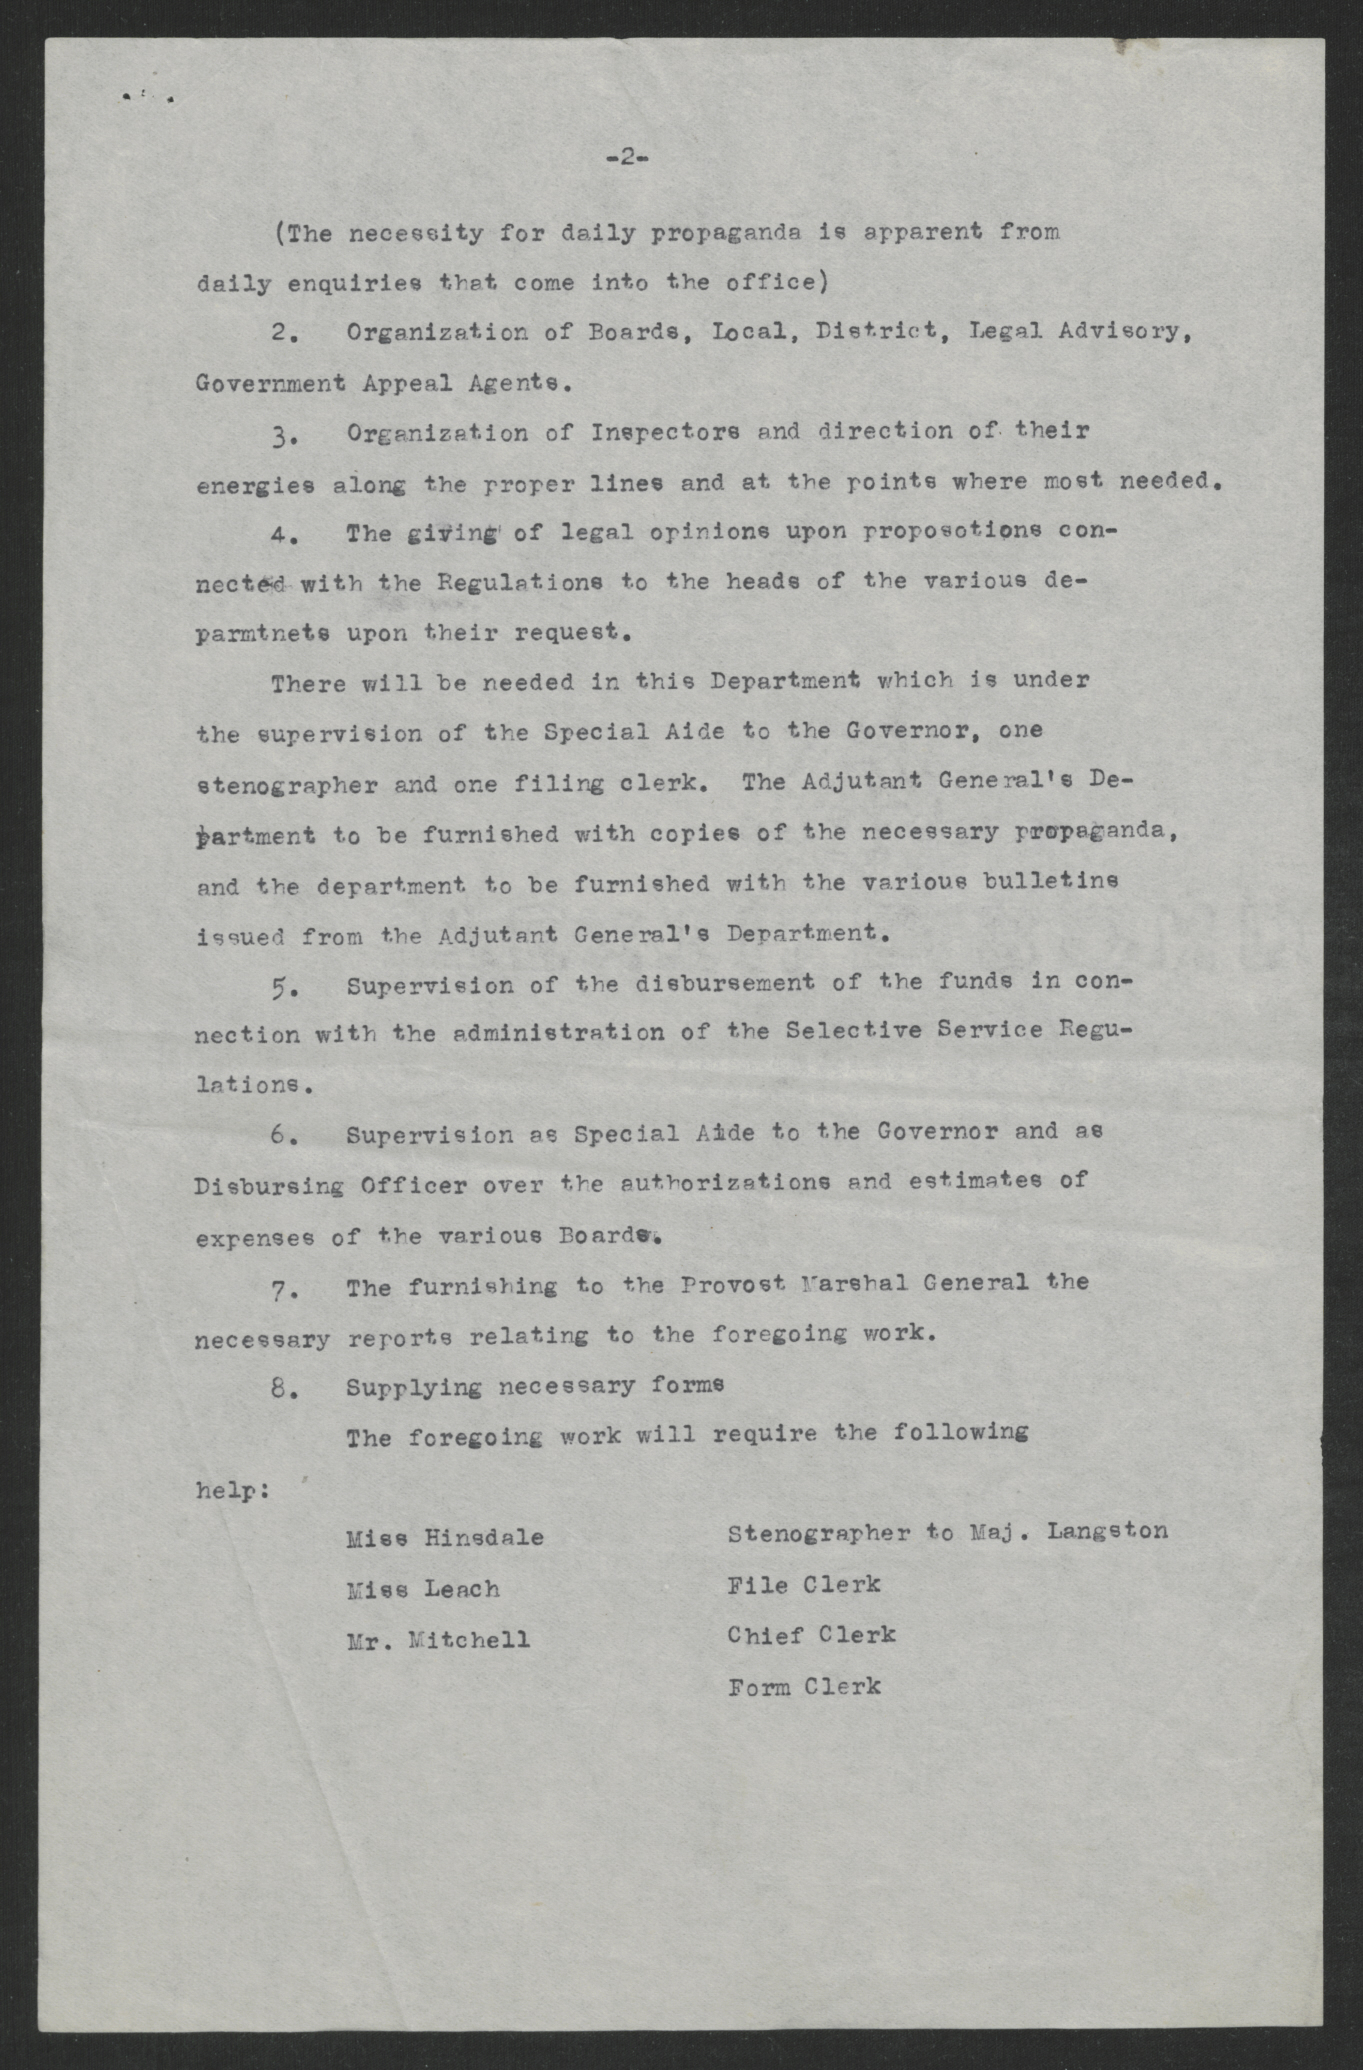 Division of Draft Work between Laurence W. Young and John D. Langston, Circa 1918, page 2